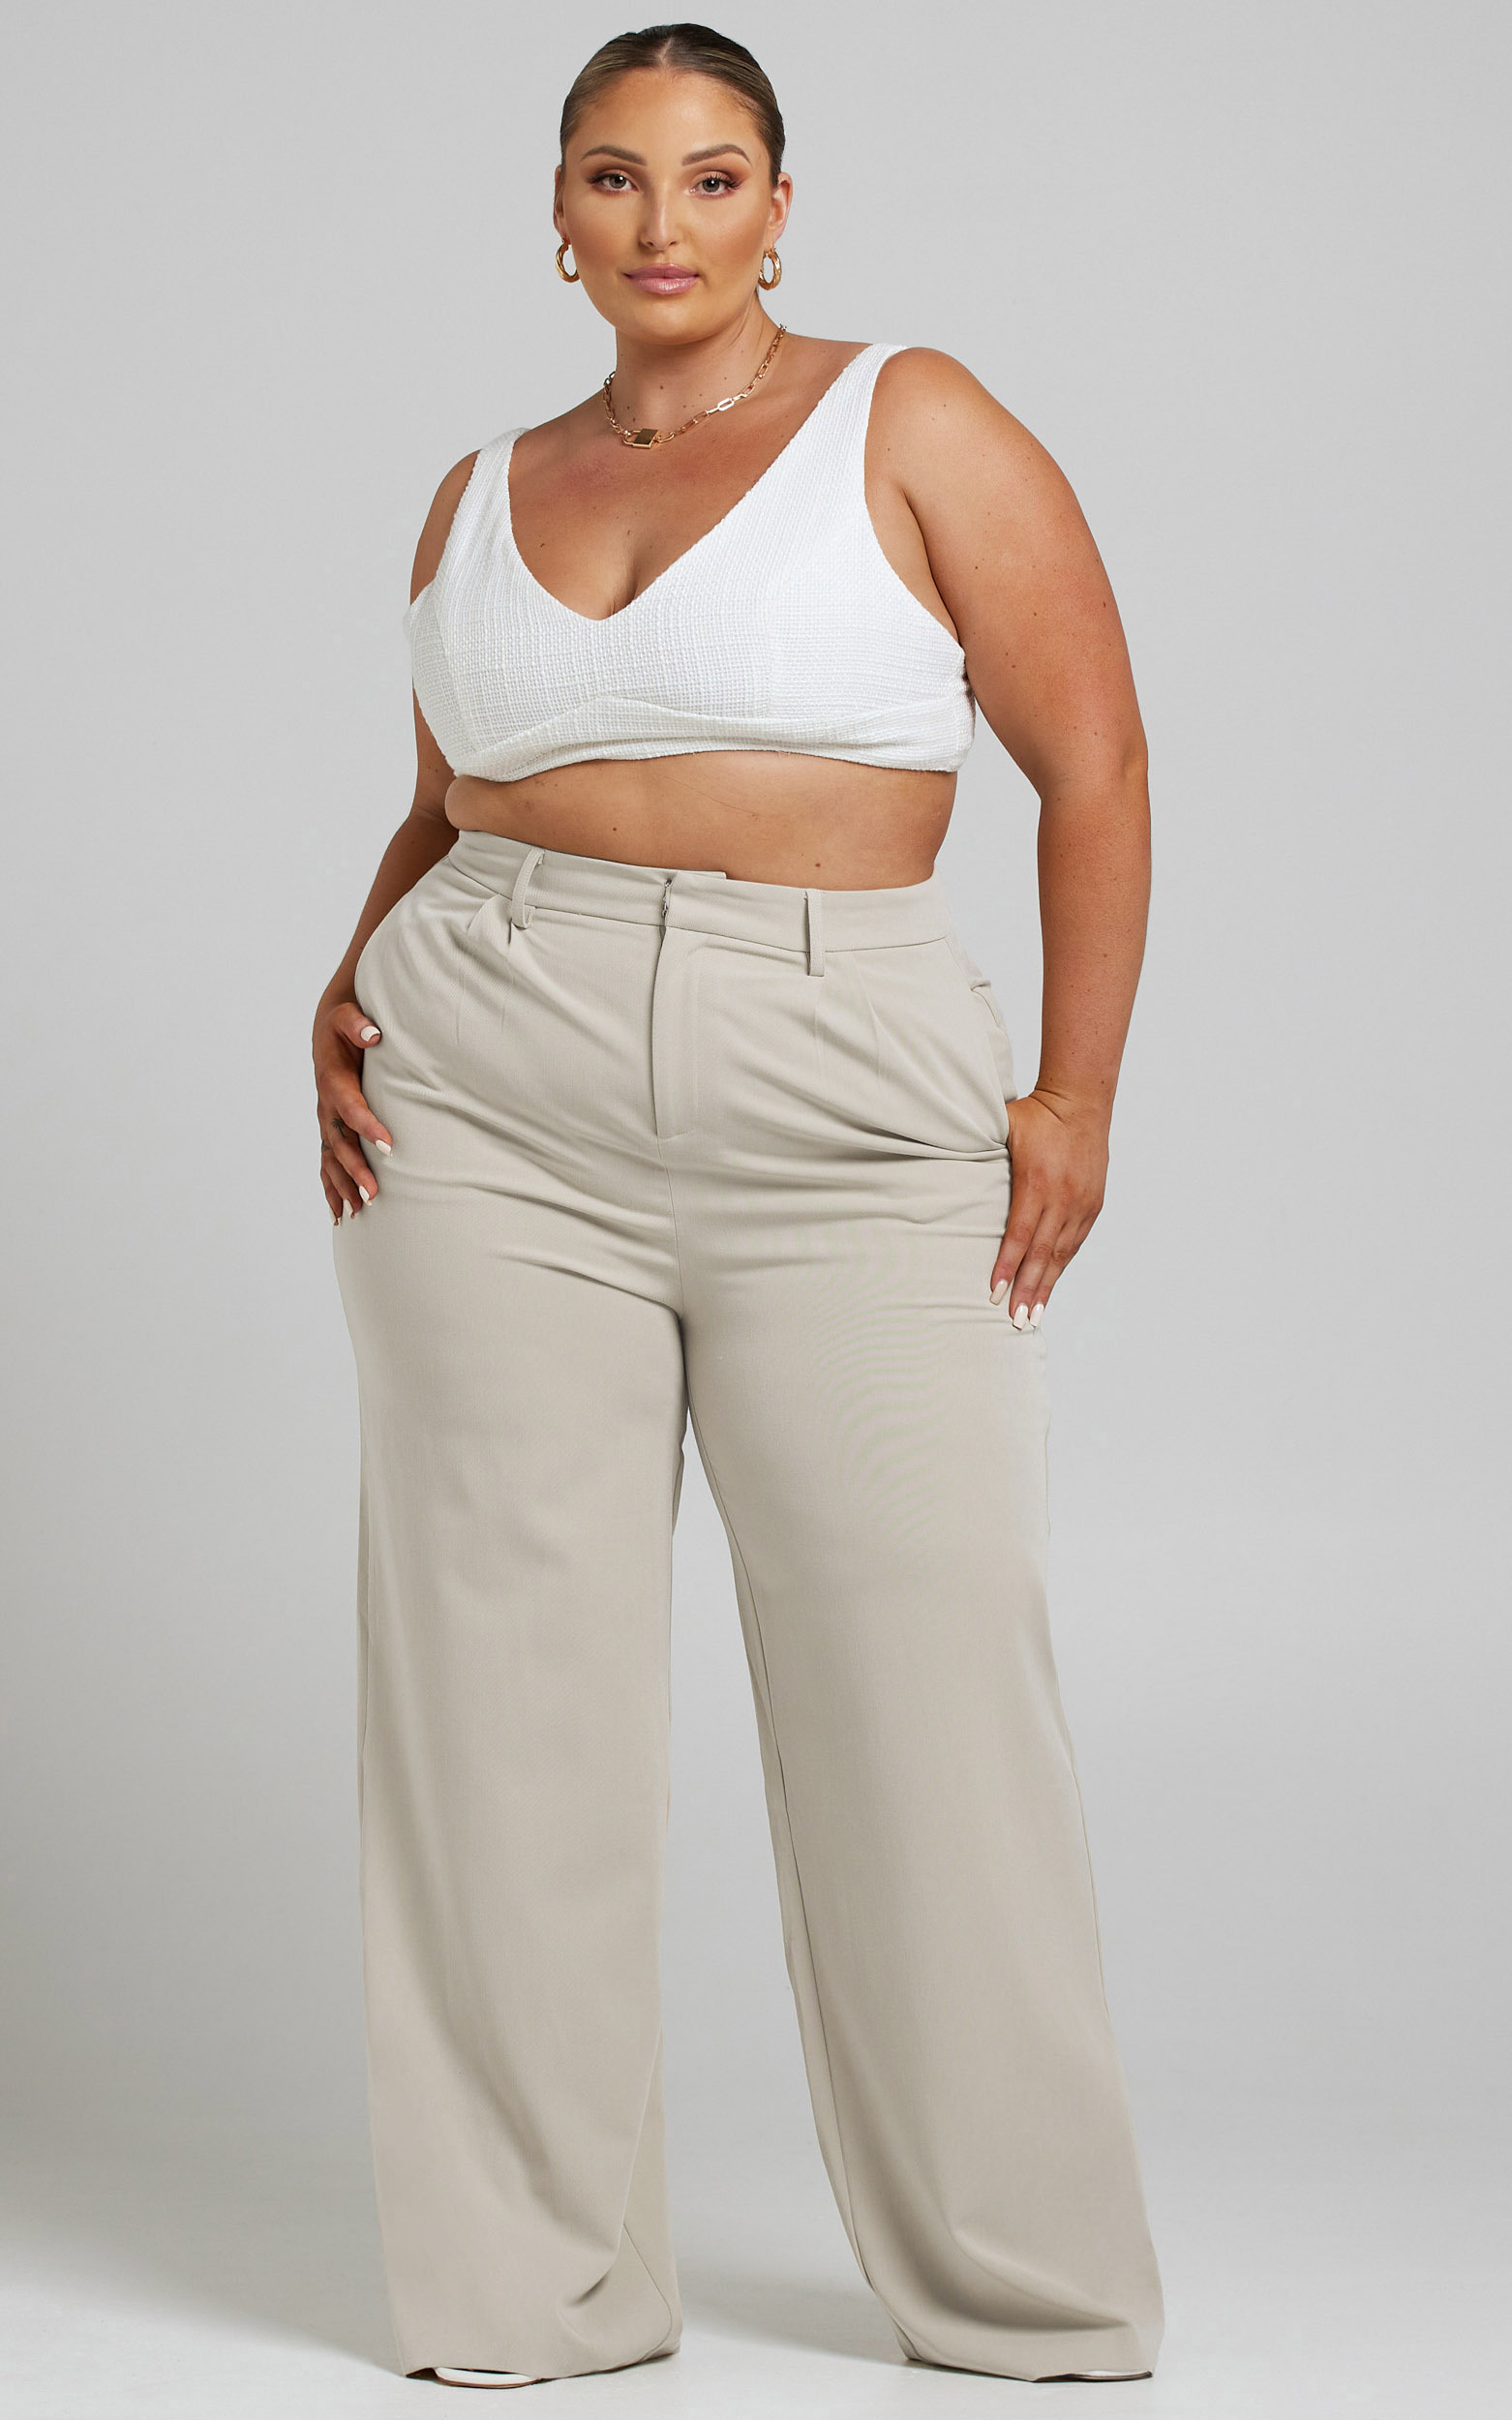 Lorcan High Waisted Tailored Pants in Stone - 04, NEU4, hi-res image number null